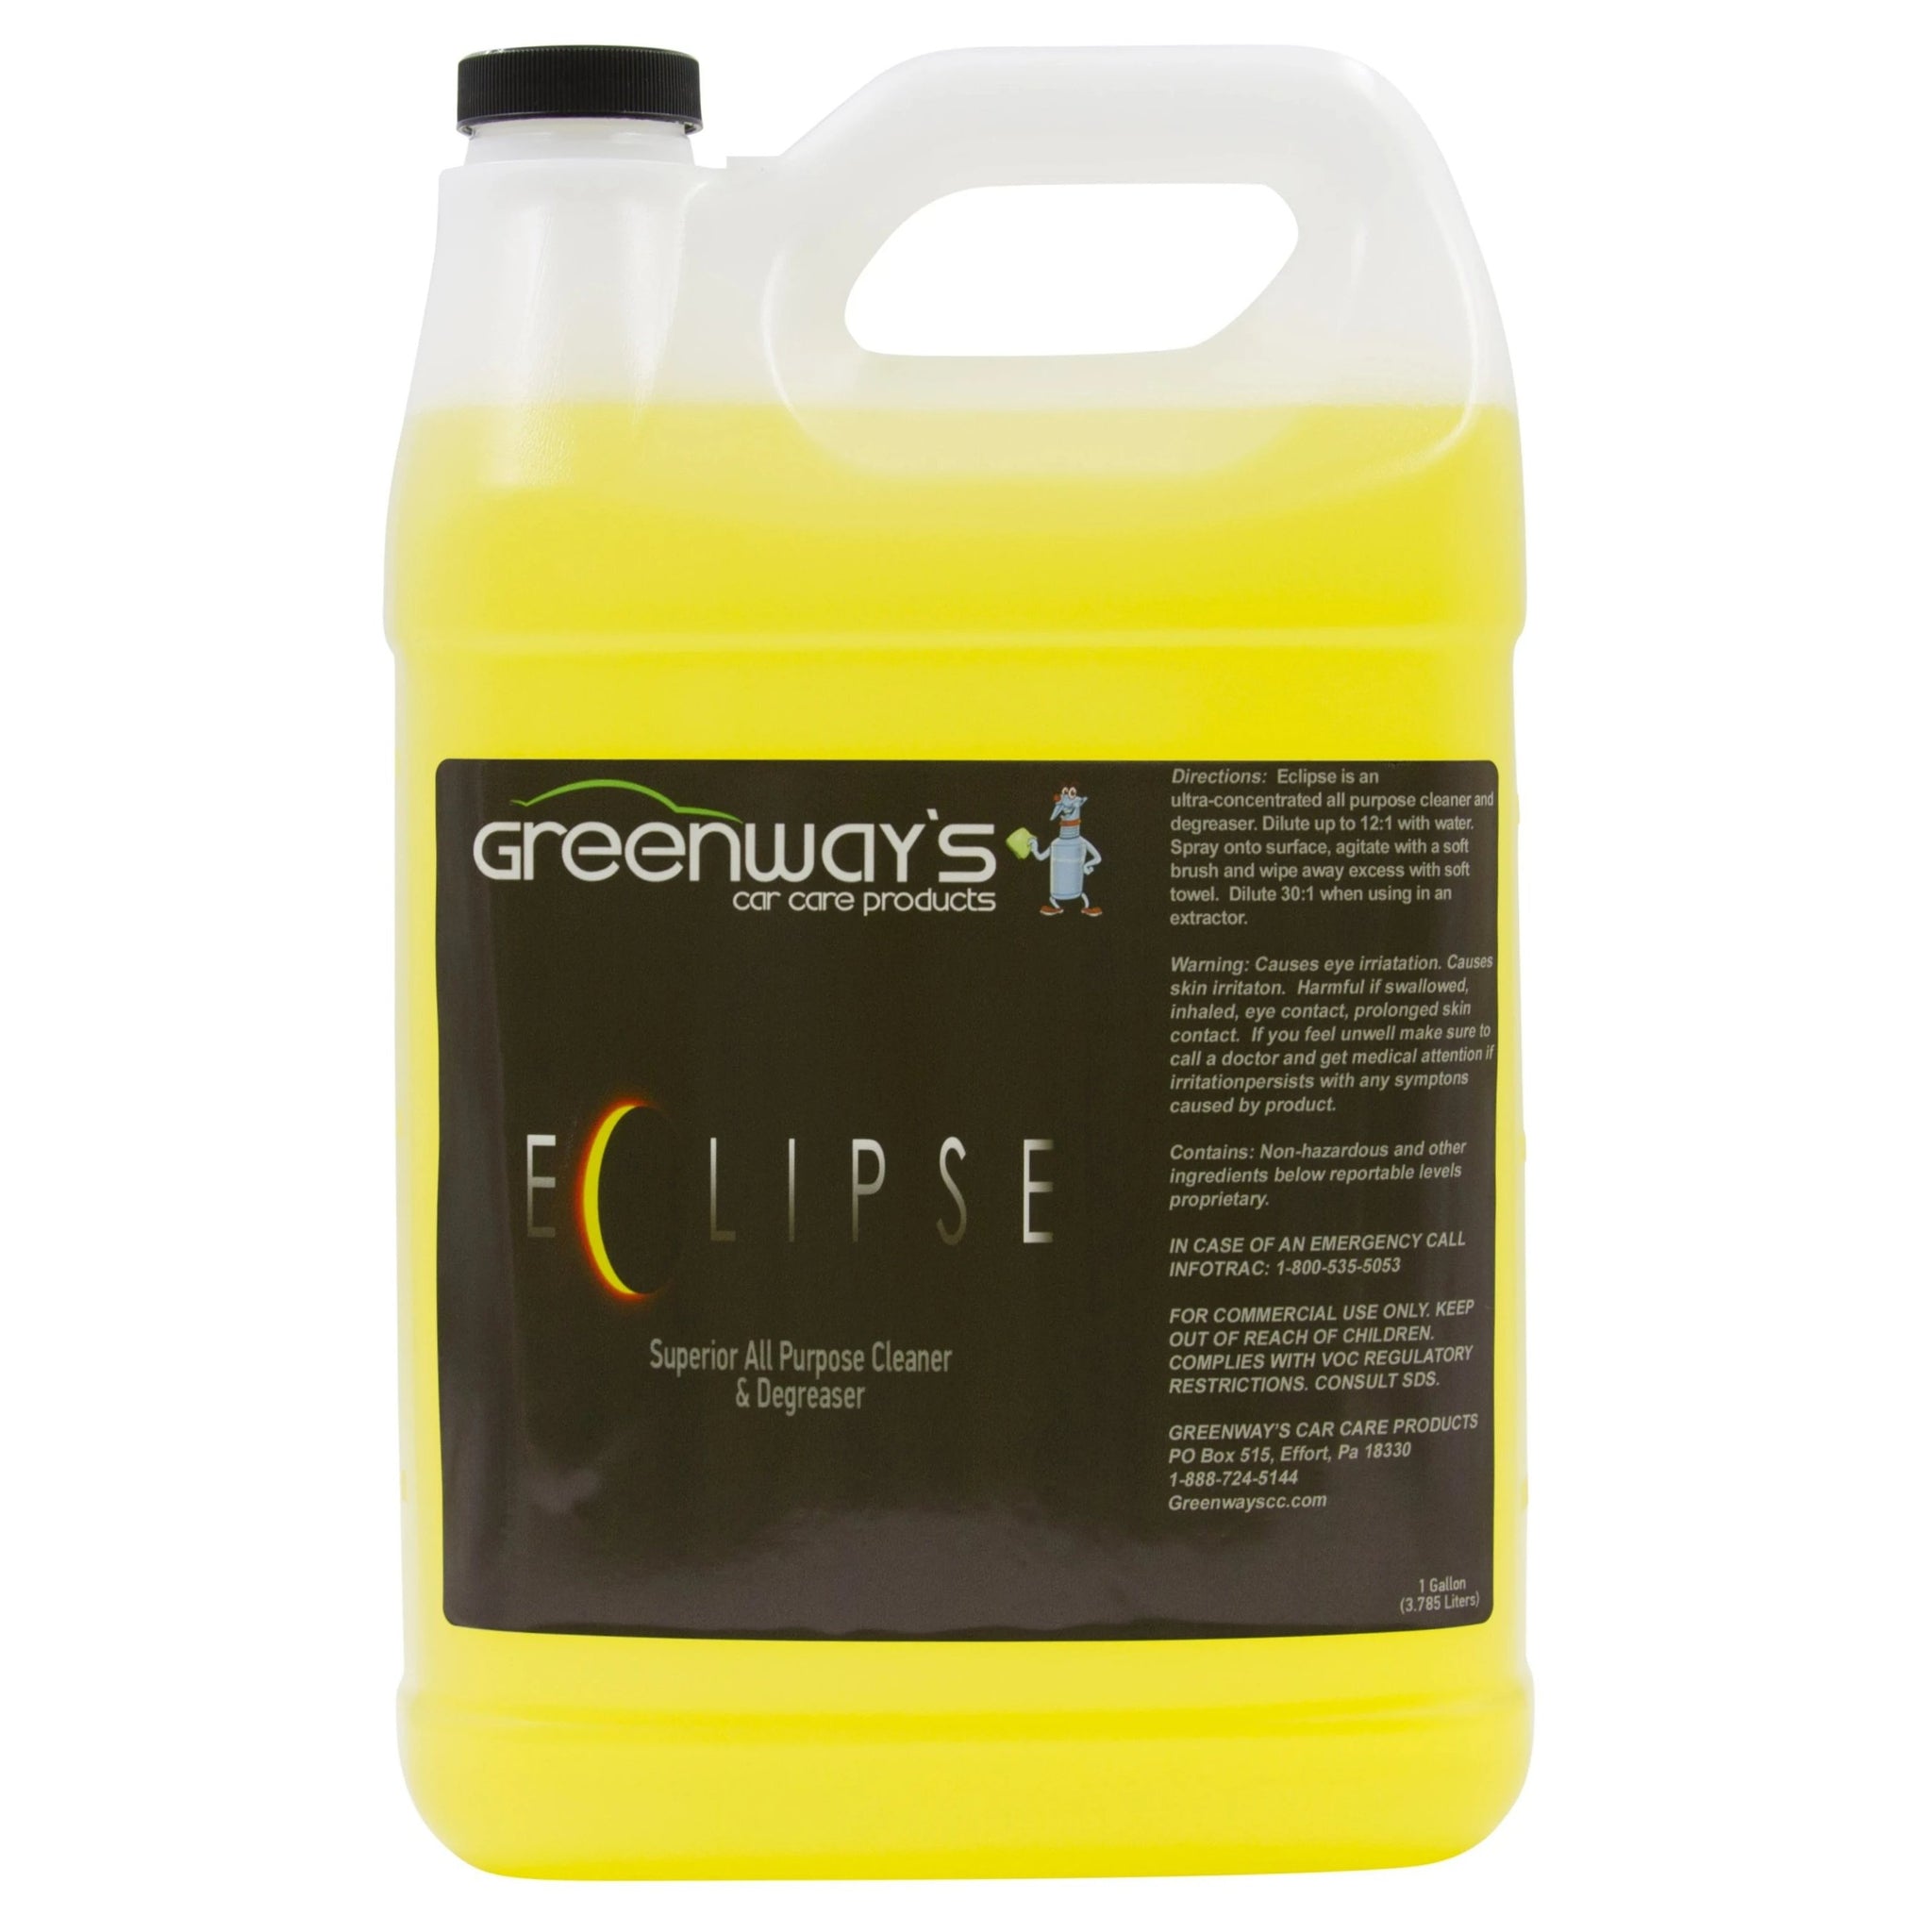 All-Purpose Cleaner Degreaser